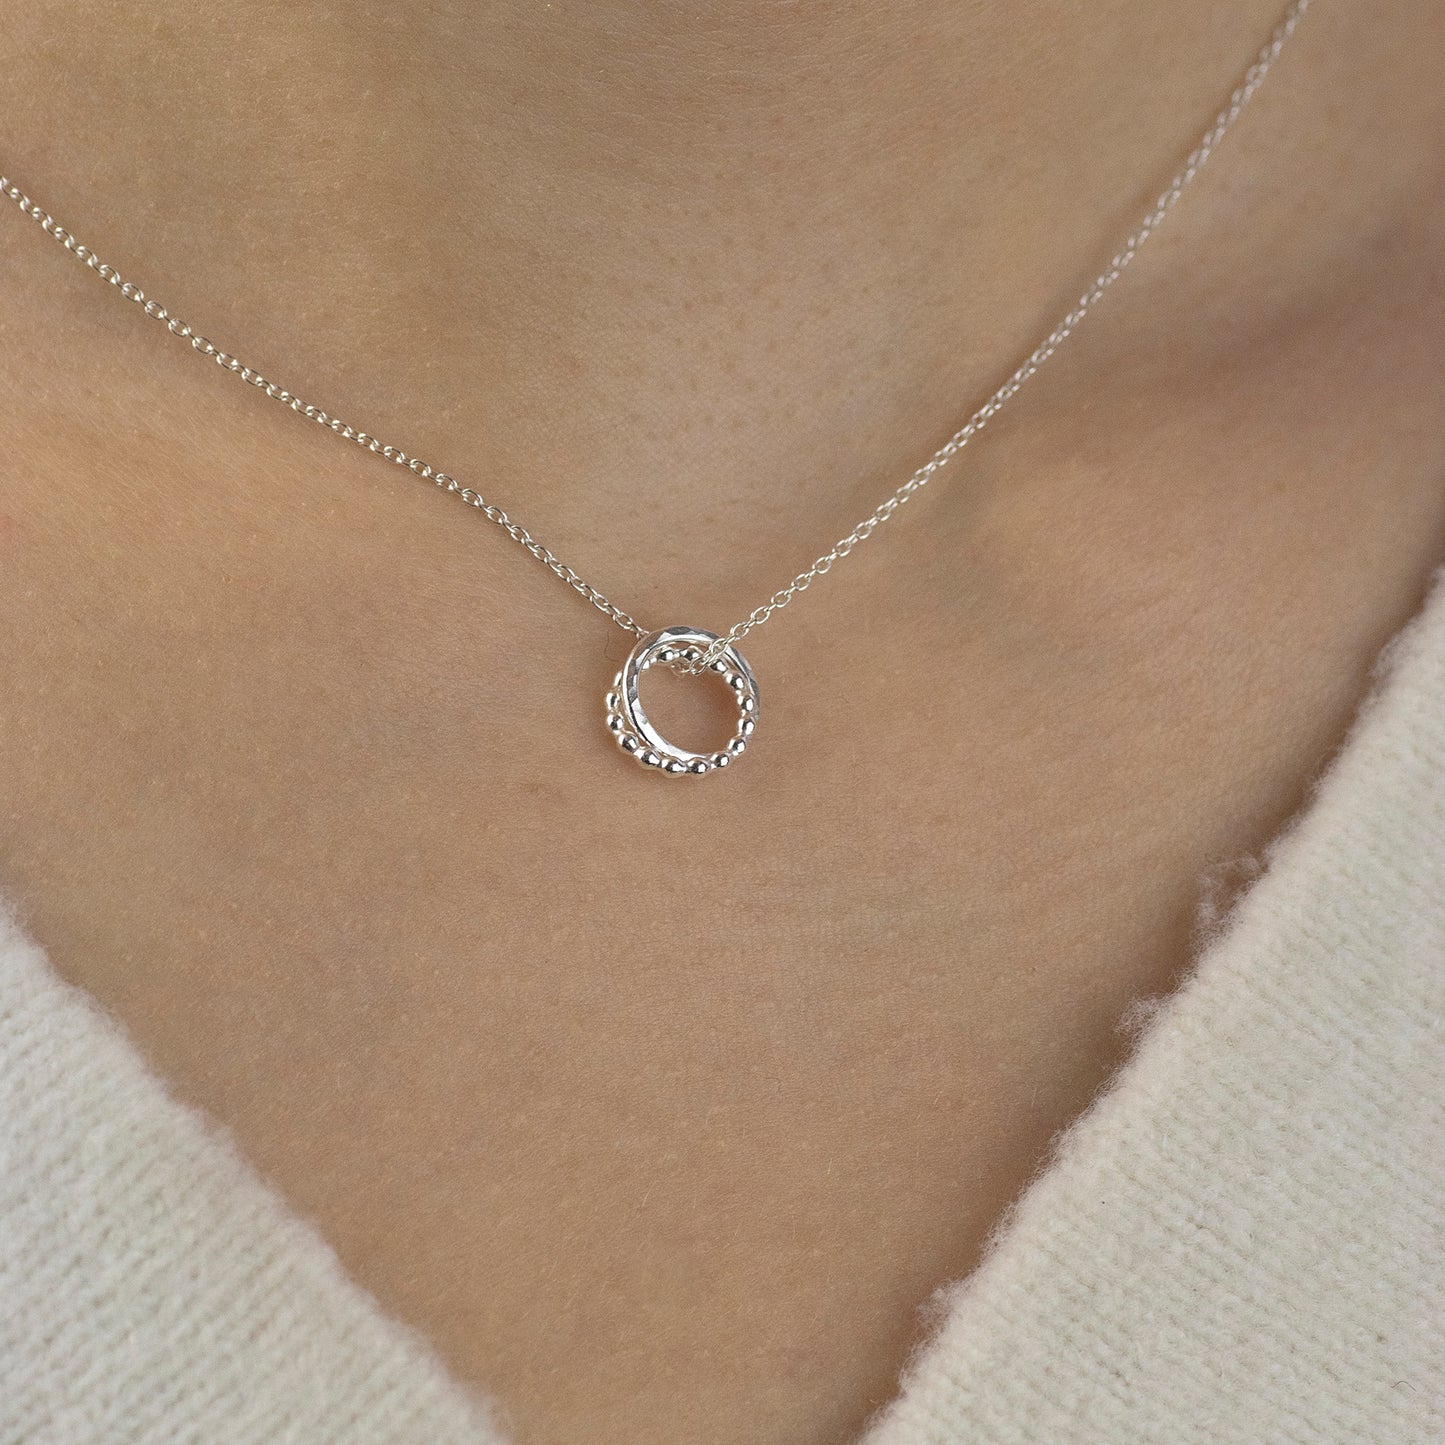 2nd Anniversary Necklace - The Original 2 Links for 2 Years Necklace - Silver Love Knot